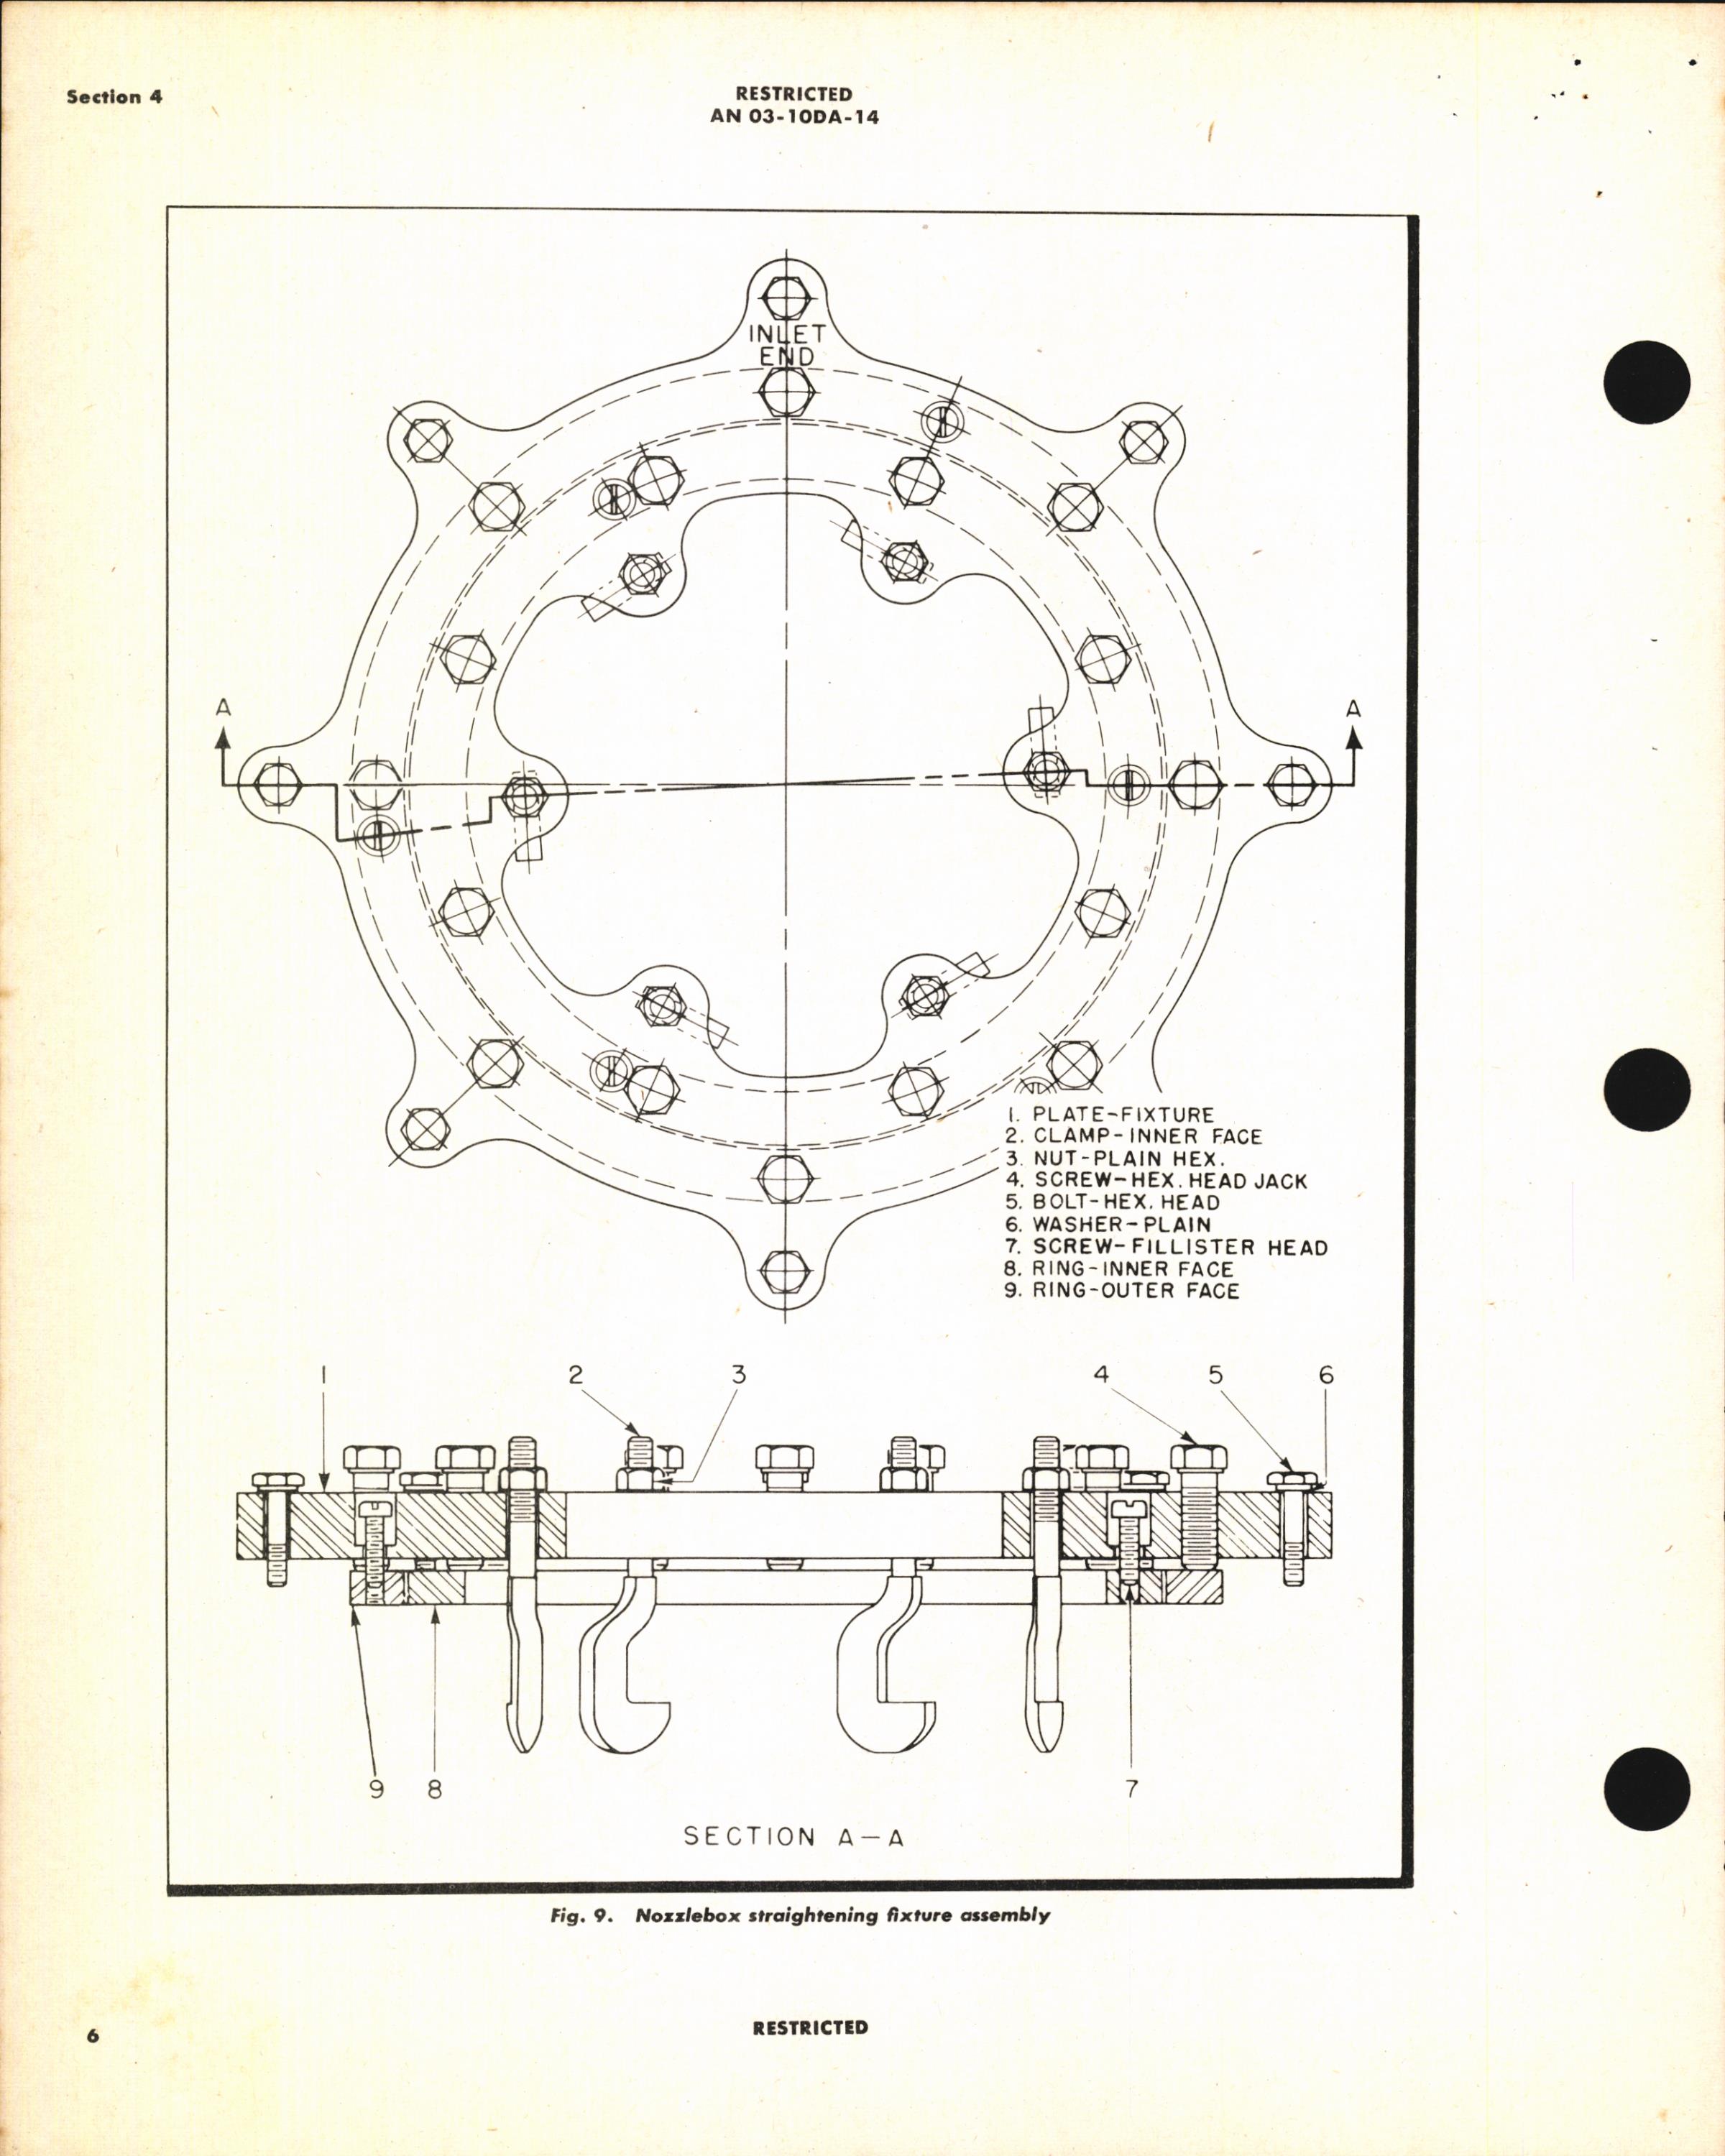 Sample page 10 from AirCorps Library document: Repair Instructions for Nozzle Boxes Types B-1, 2, 3, 13, 22, & 33 Turbosuperchargers